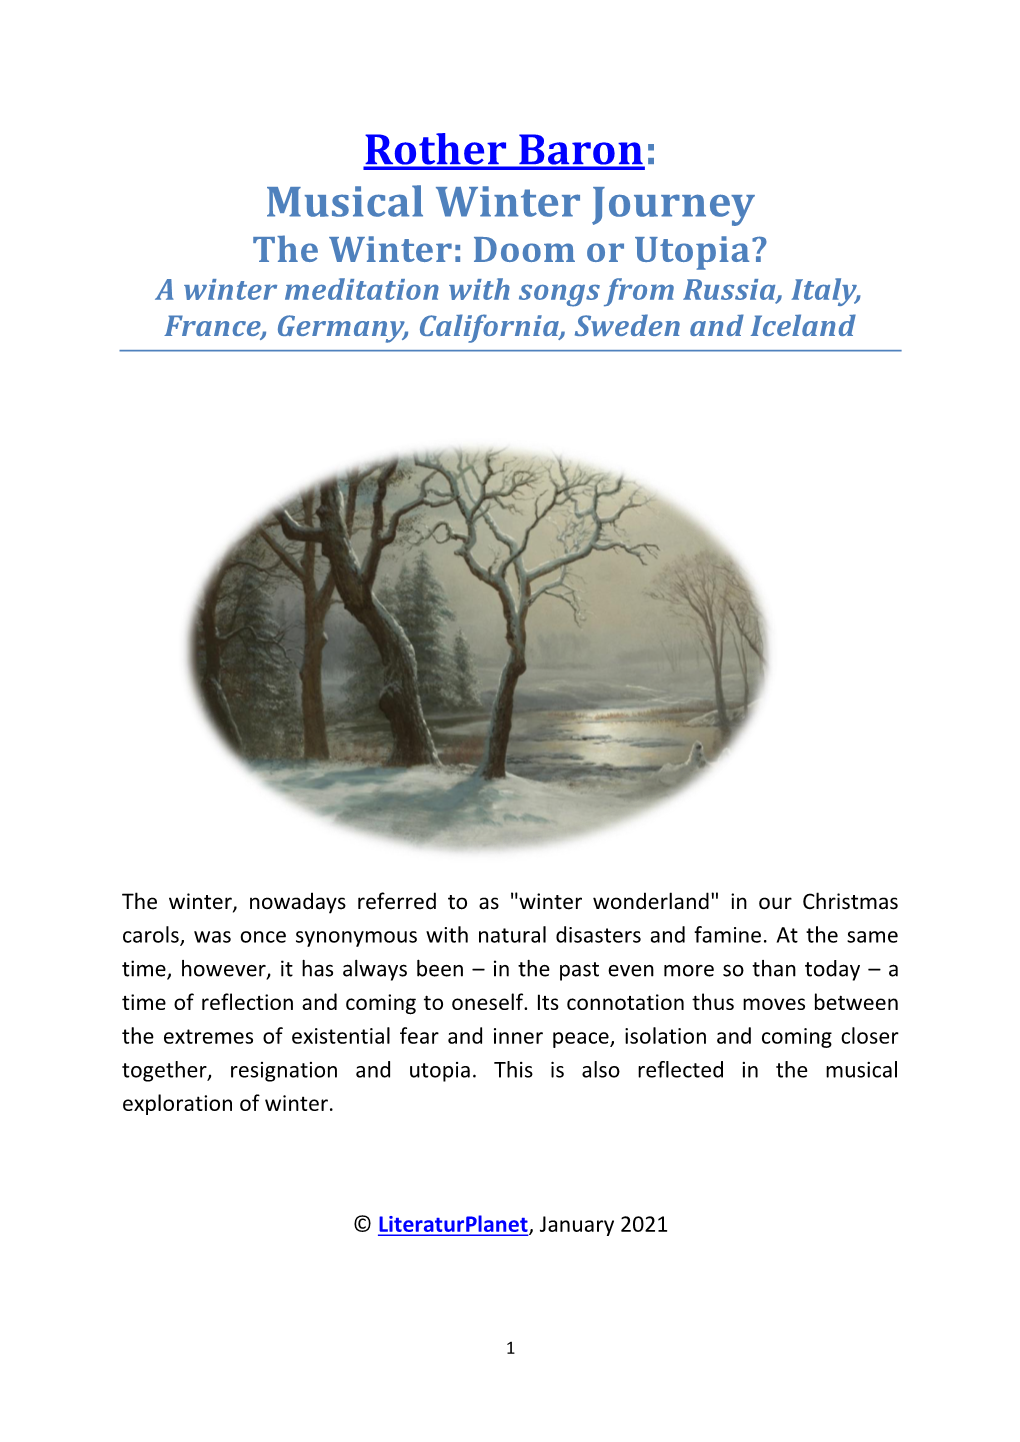 Musical Winter Journey the Winter: Doom Or Utopia? a Winter Meditation with Songs from Russia, Italy, France, Germany, California, Sweden and Iceland